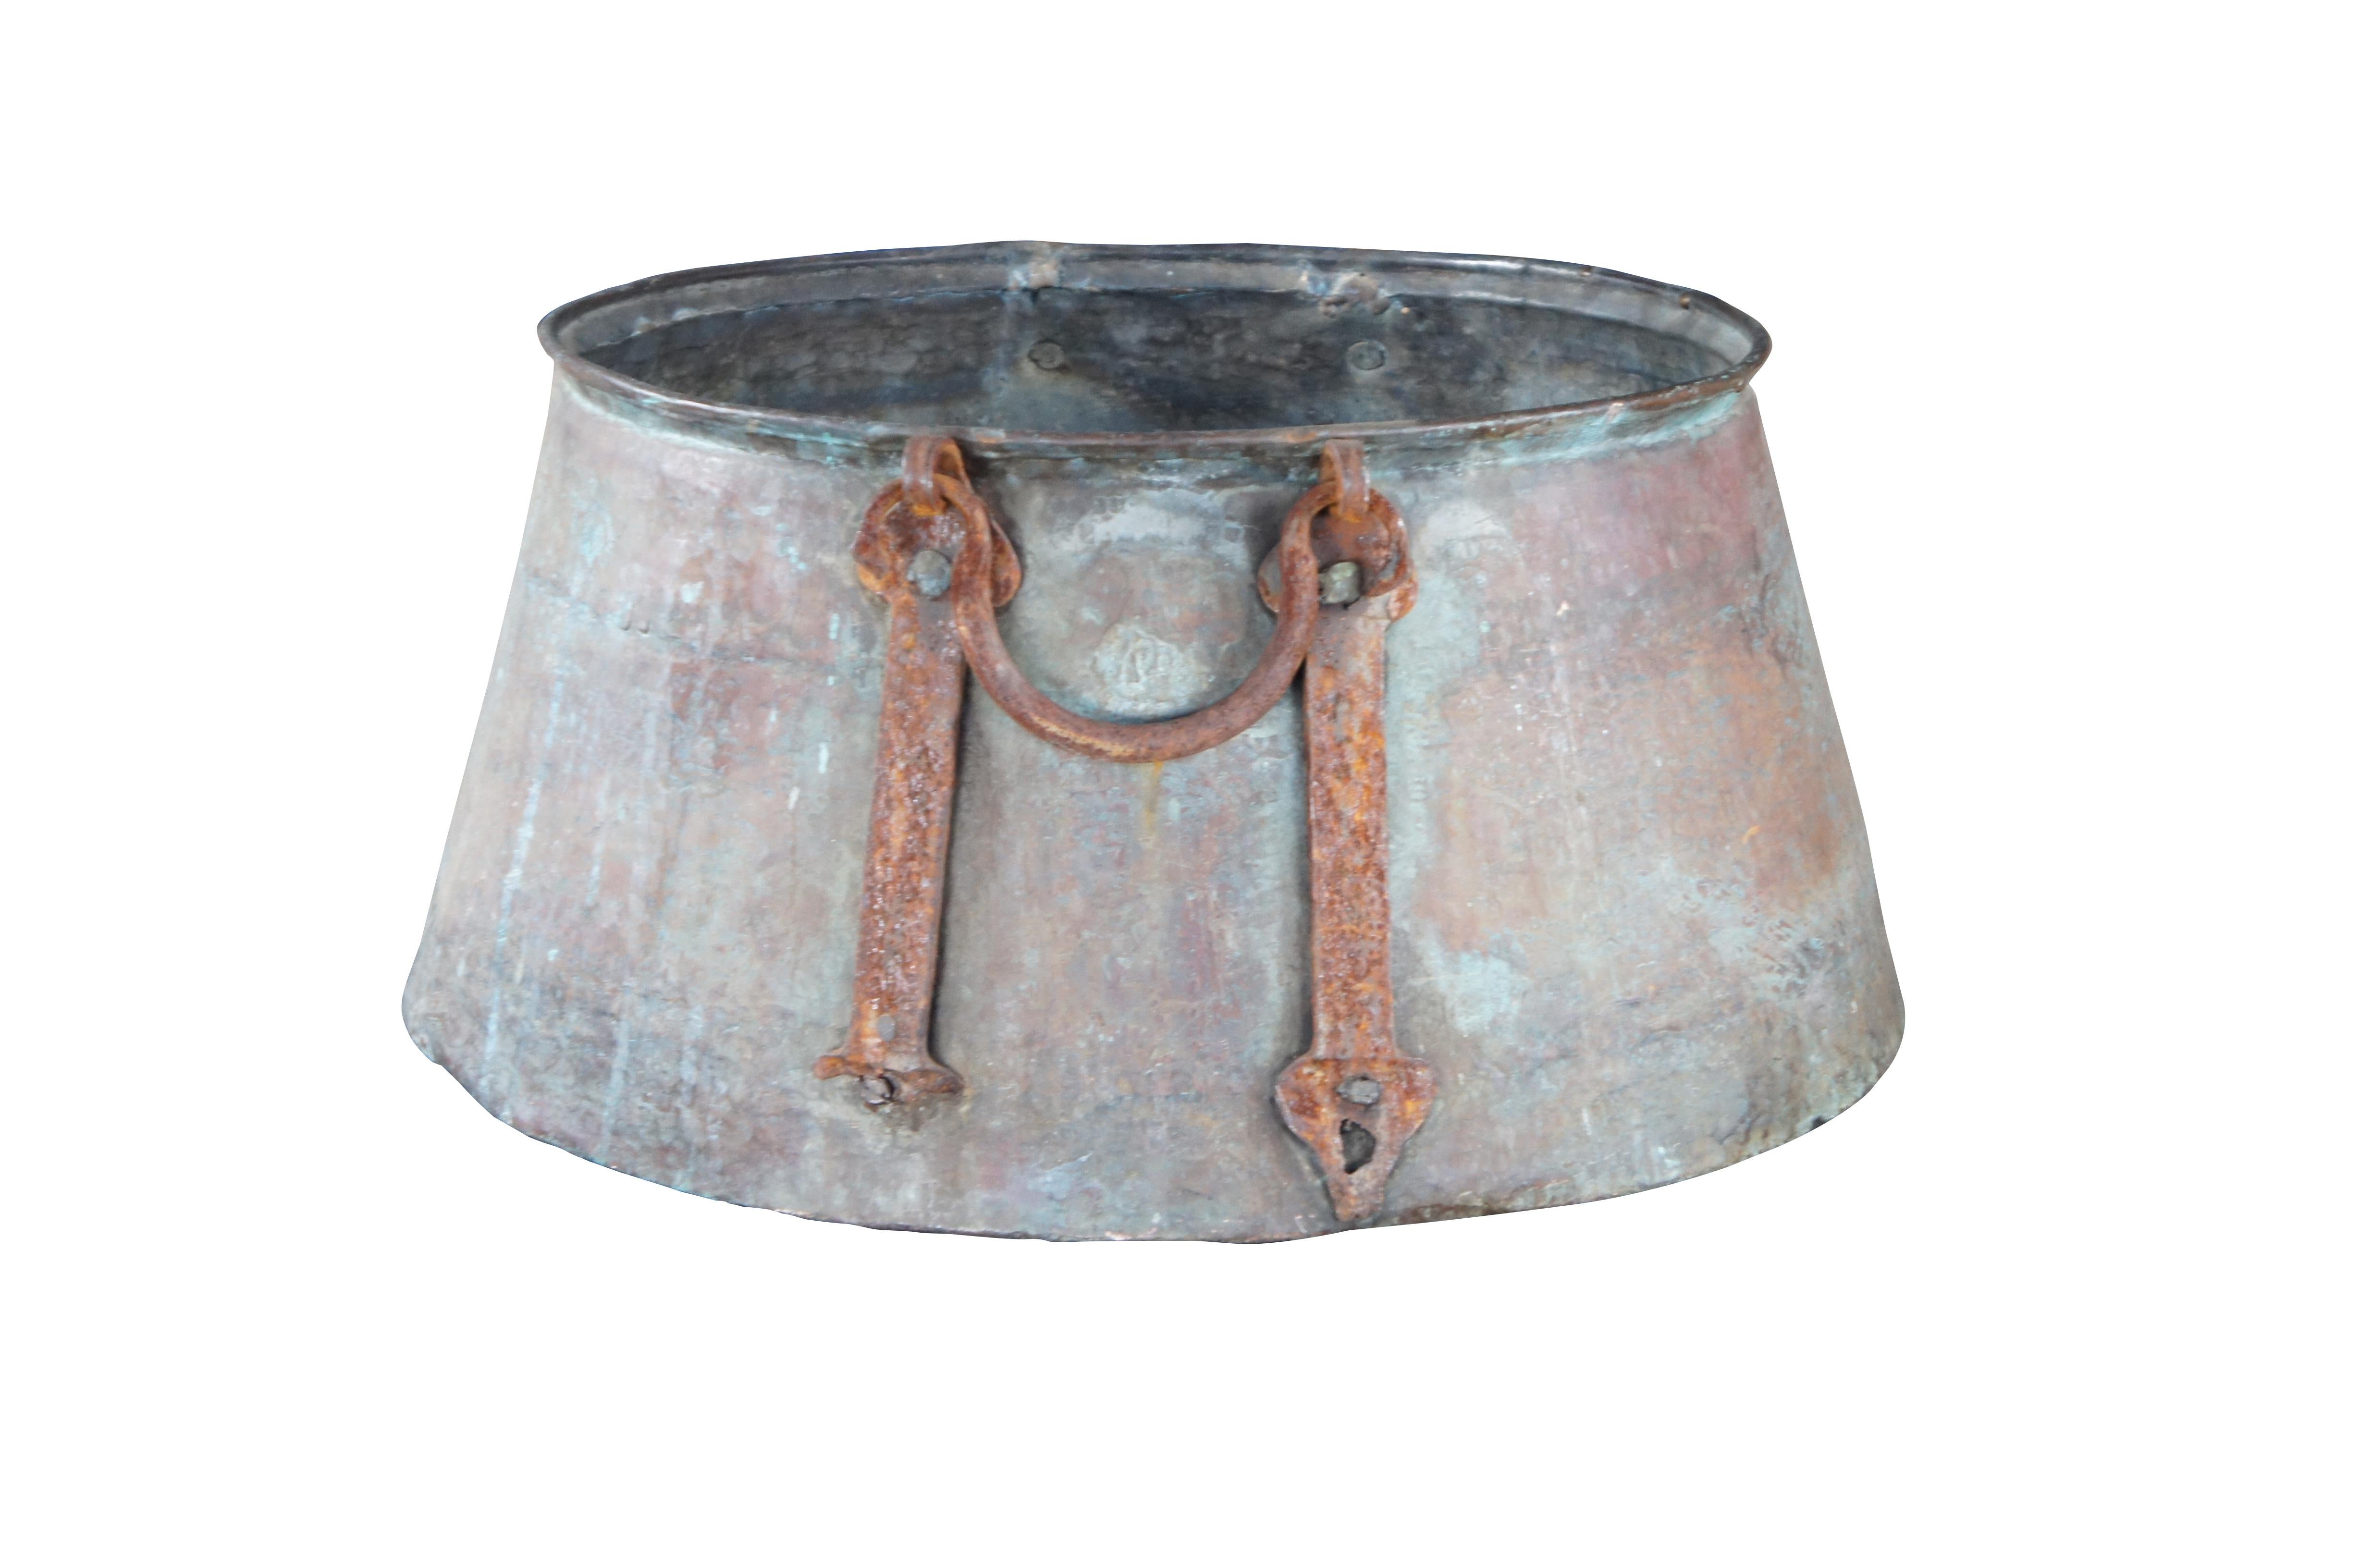 Rustic Antique 19th Century Dovetailed Copper Forged Iron Apple Butter Cauldron Pot 22